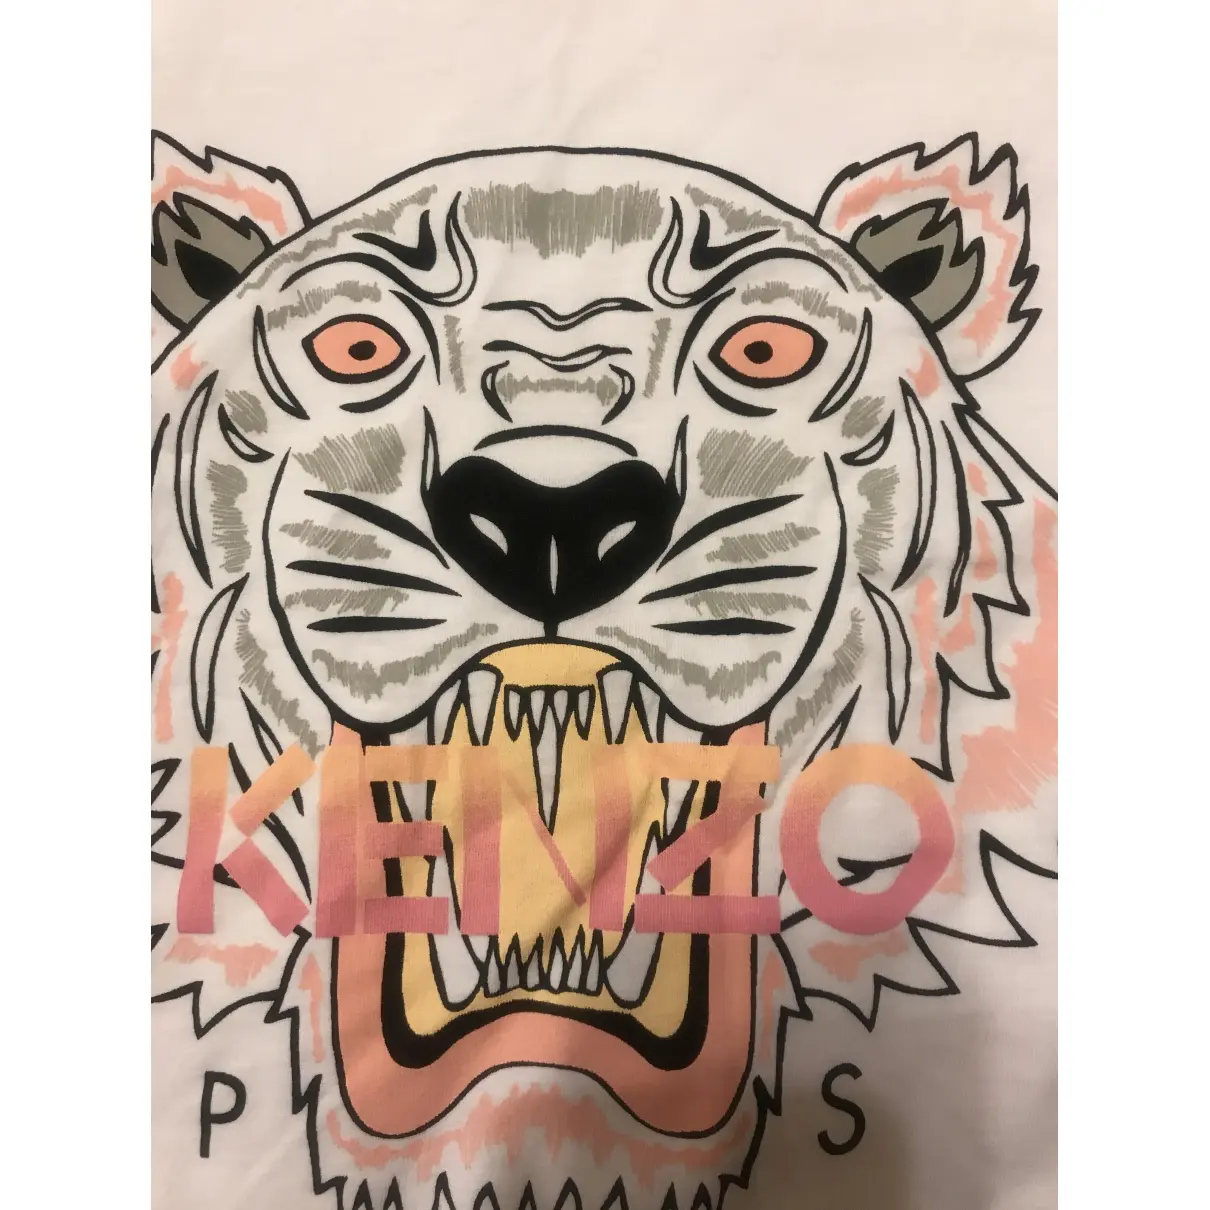 Kenzo T-shirt for sale